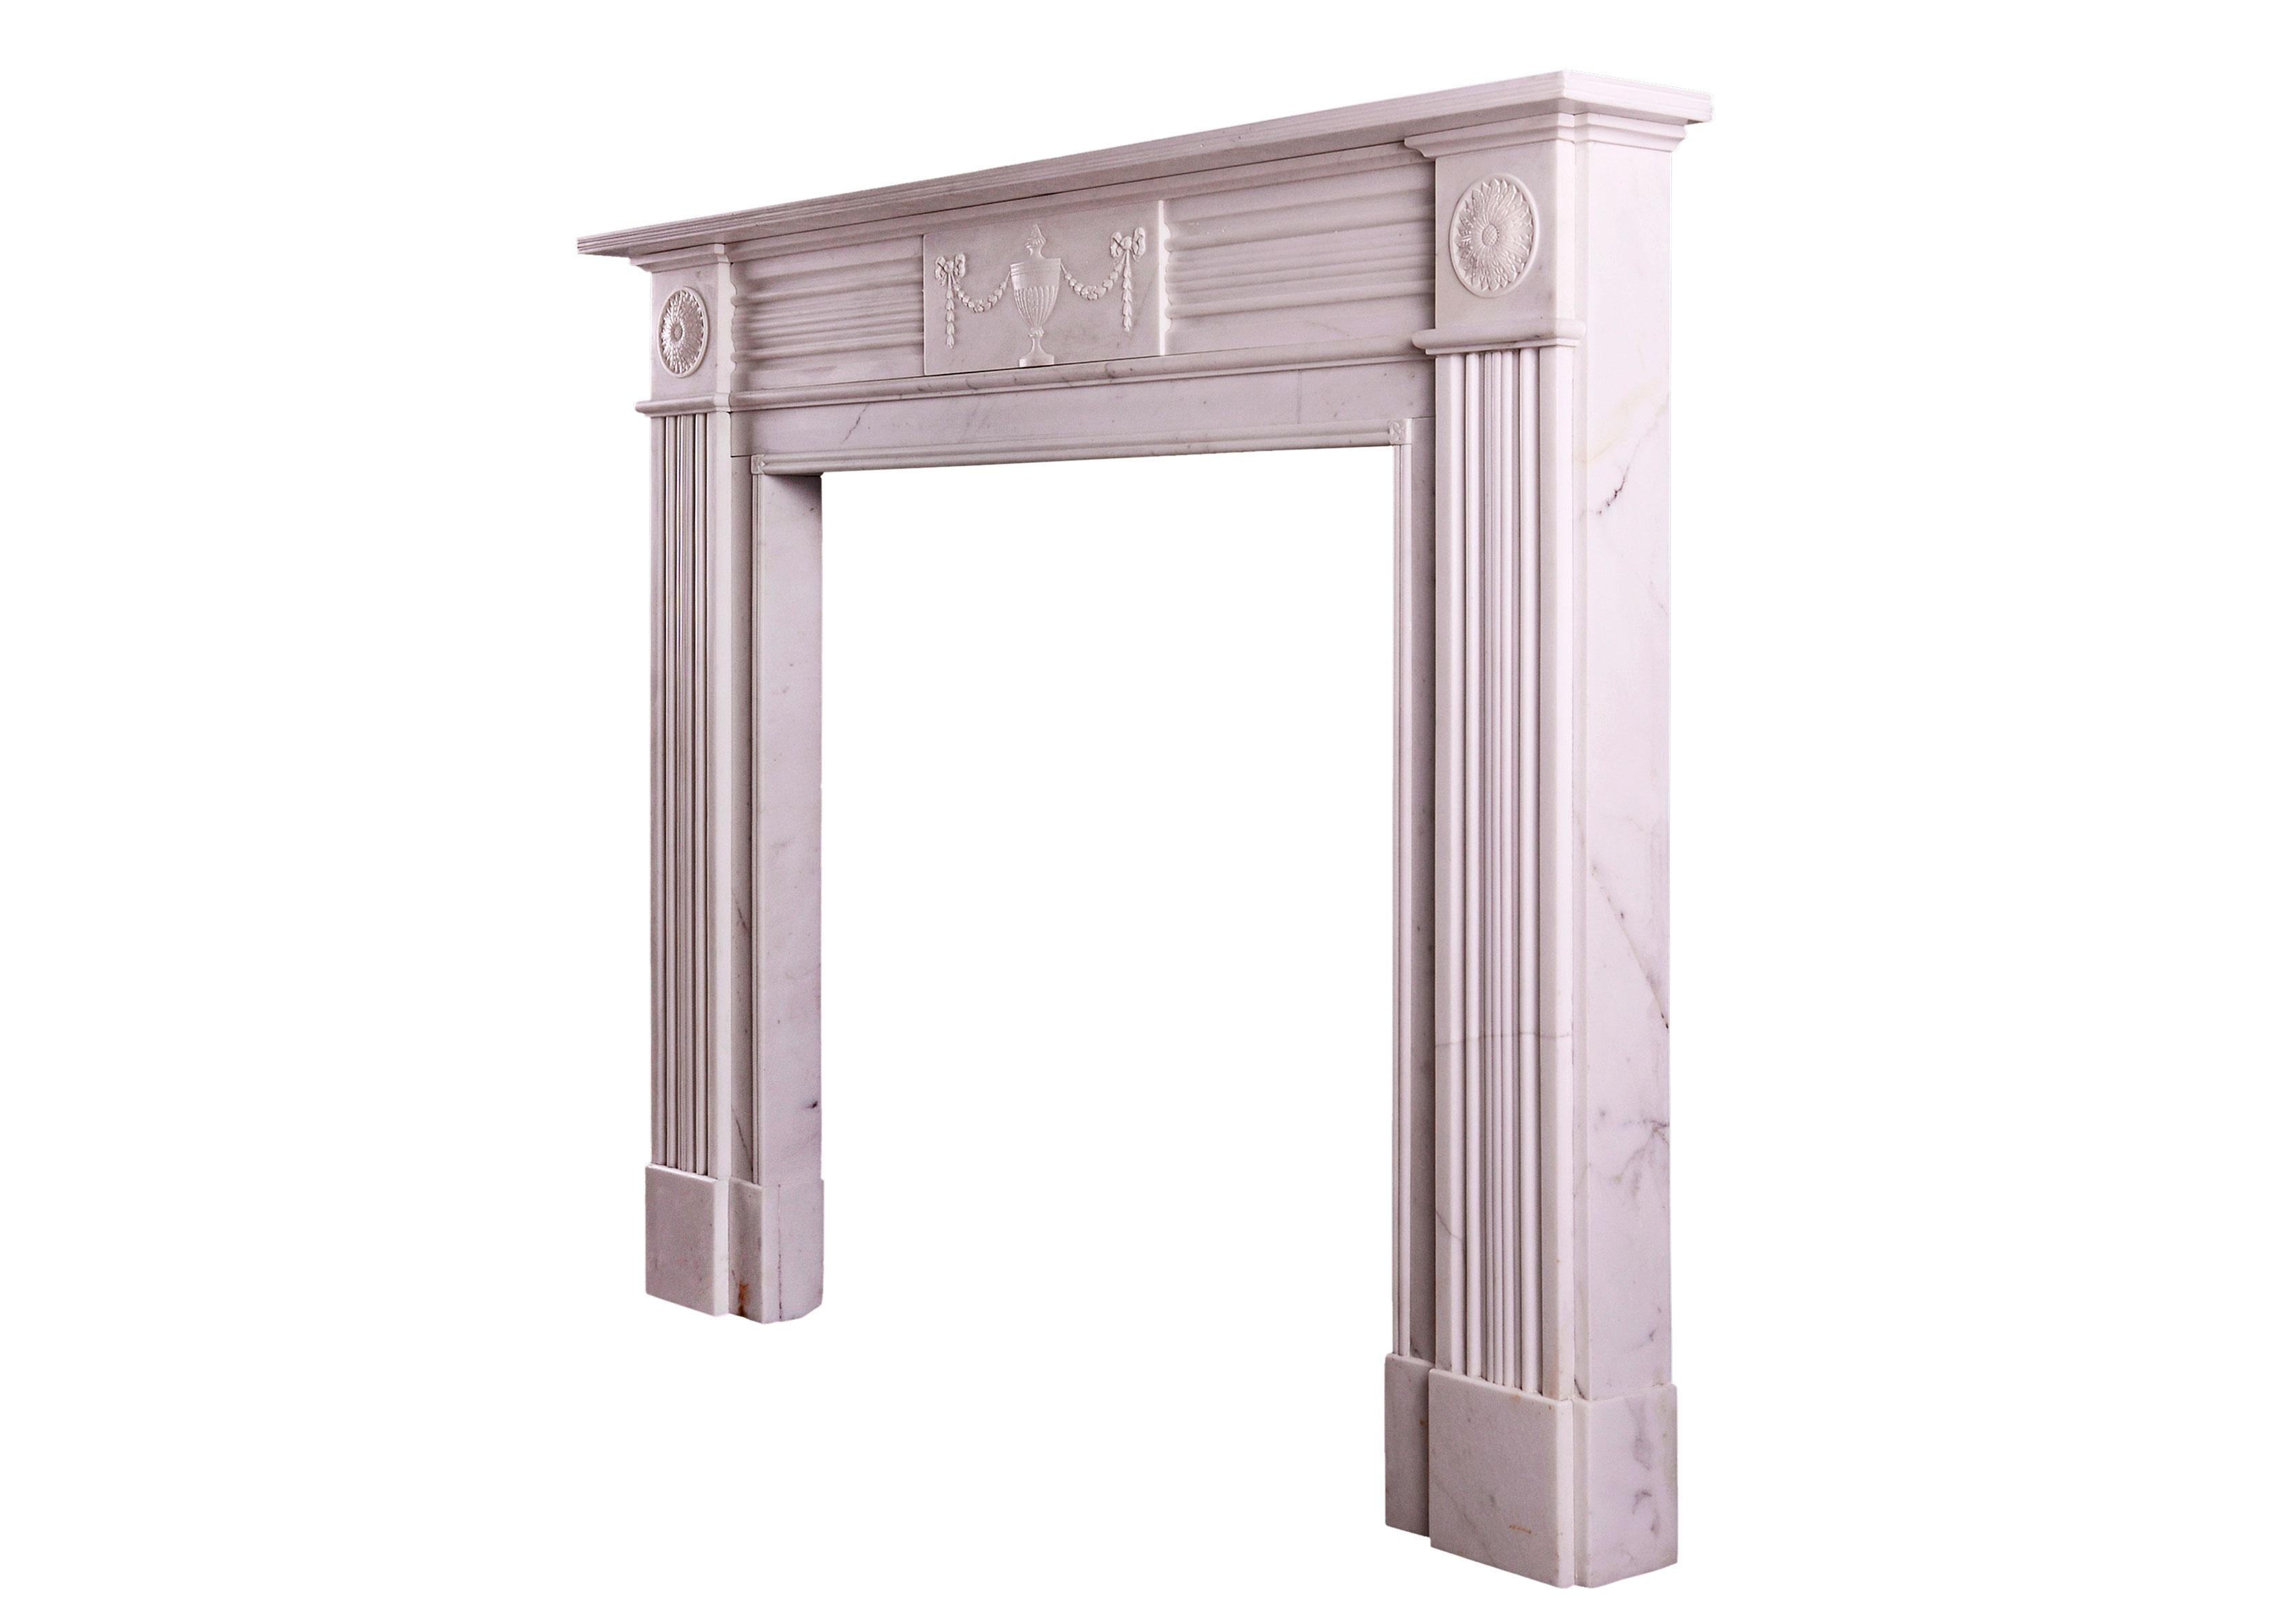 19th Century White Marble Fireplace in the Regency Style